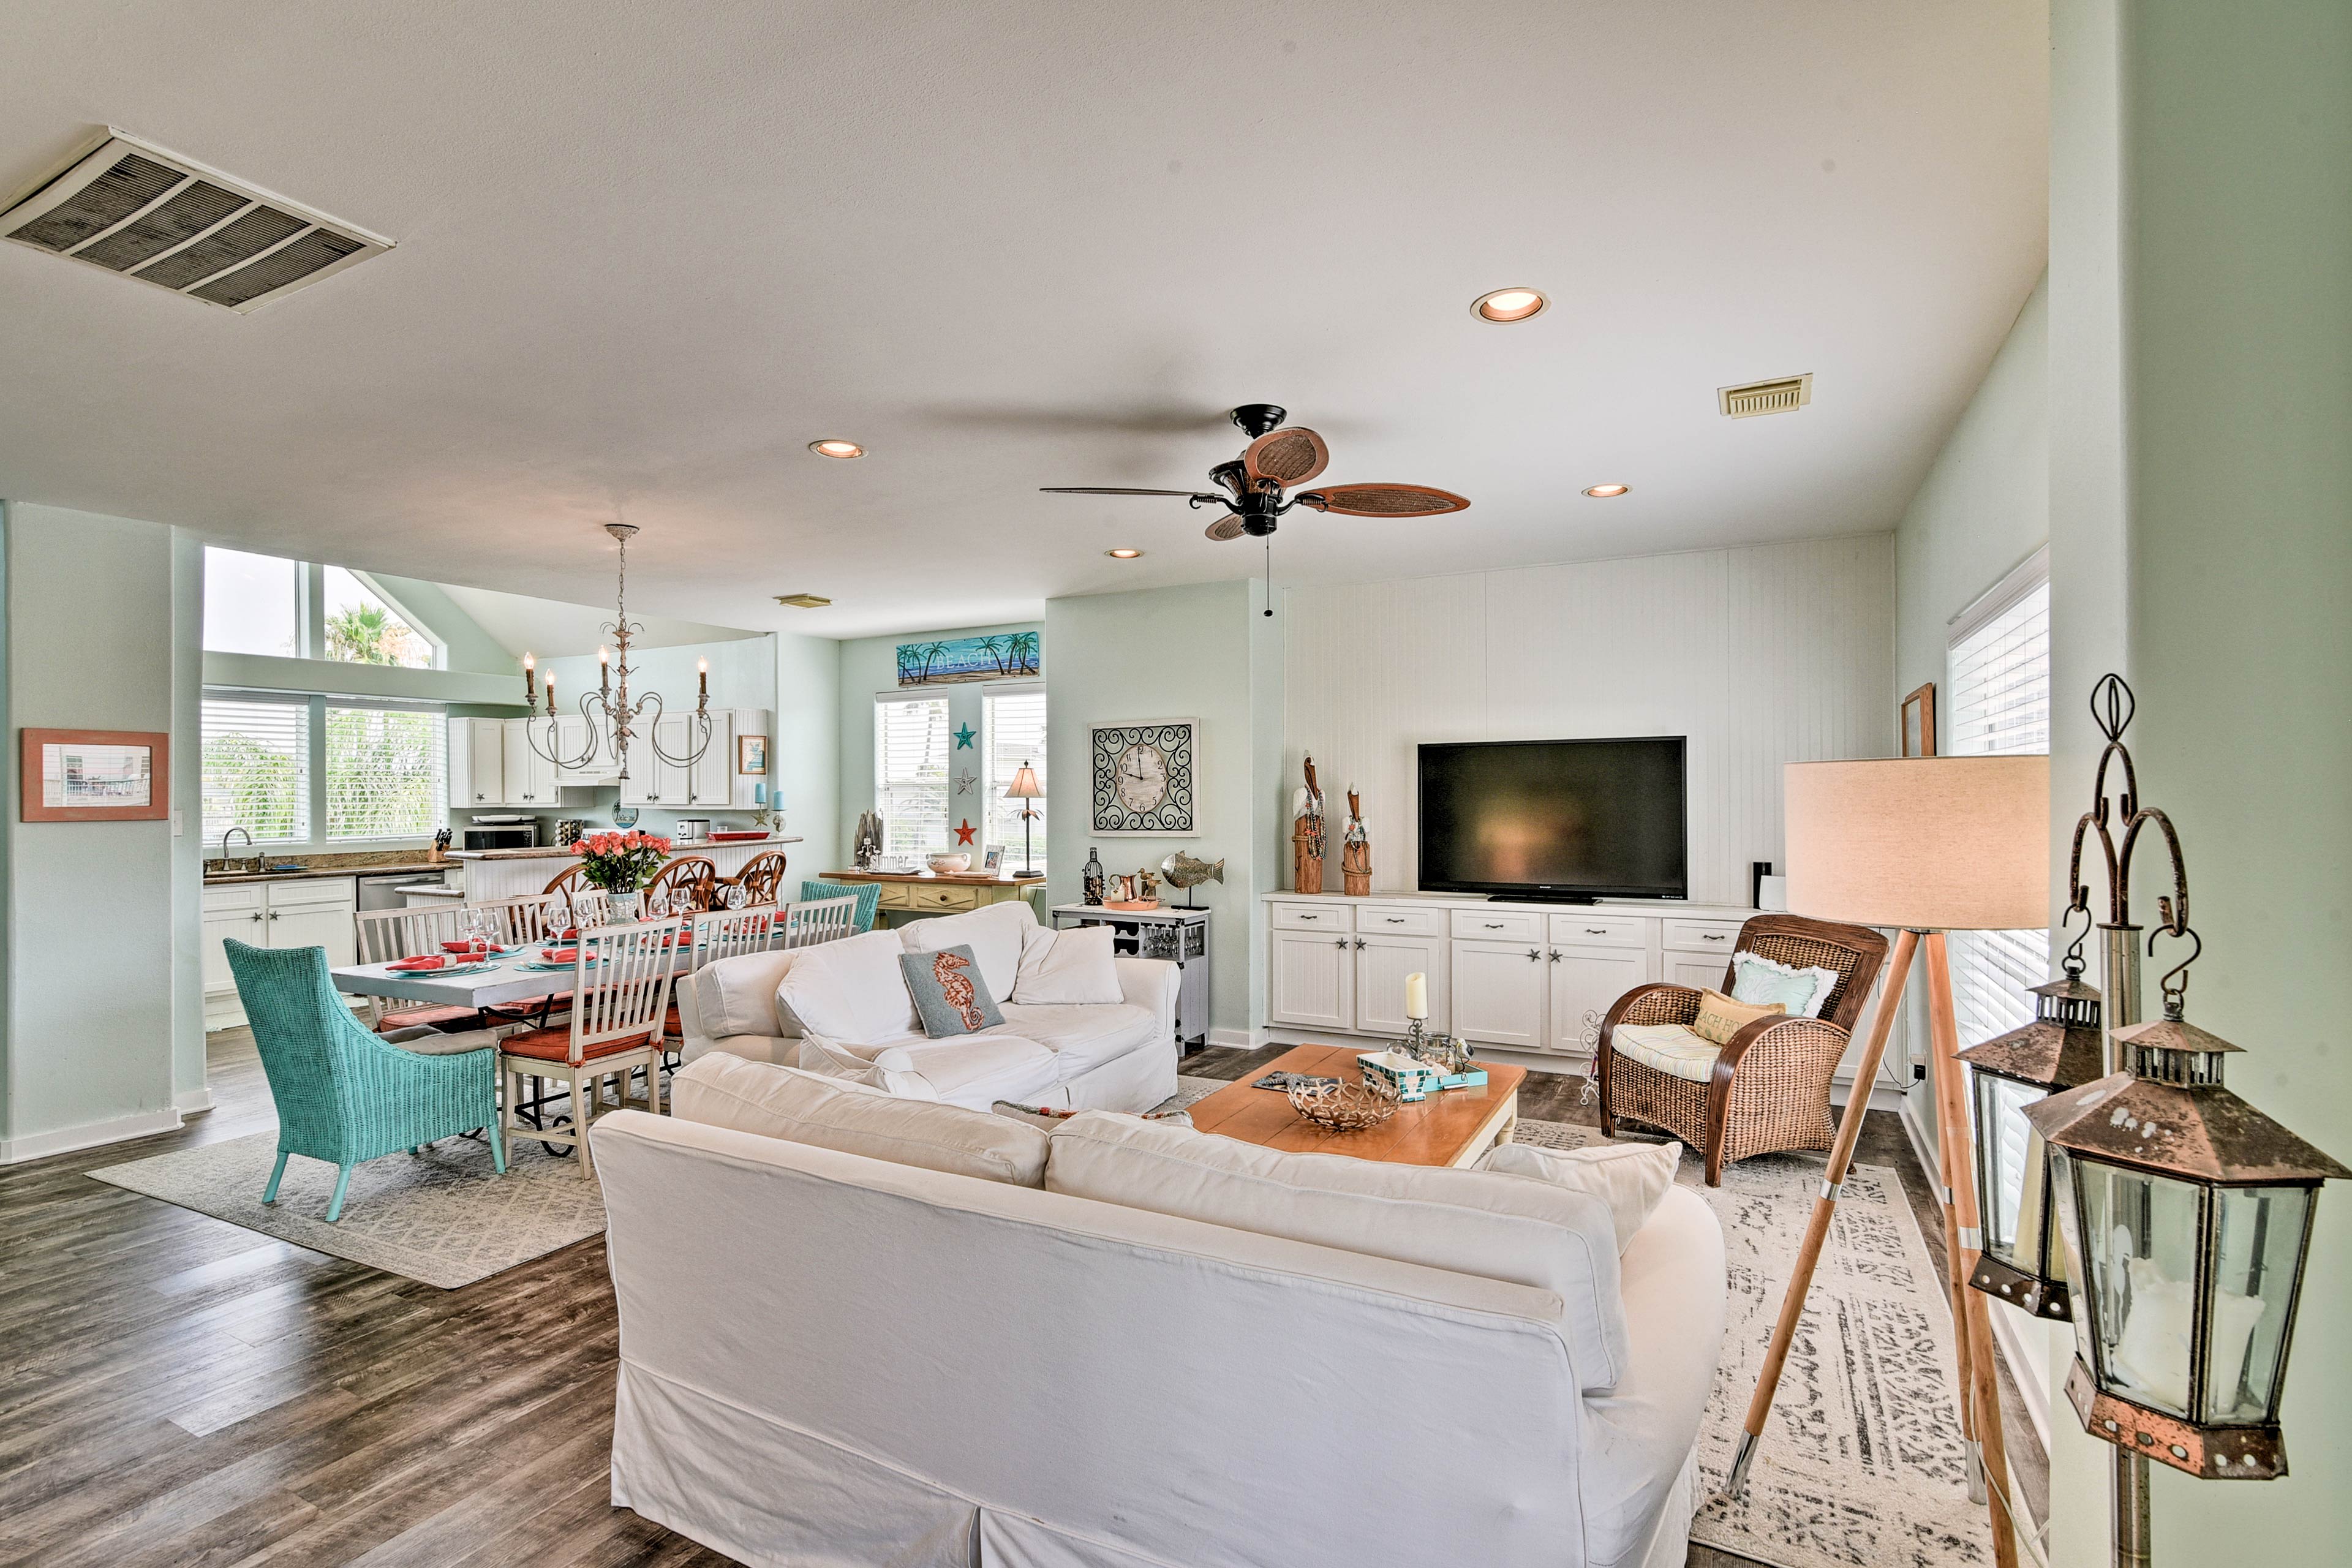 Coral and turquoise accents highlight the living room.